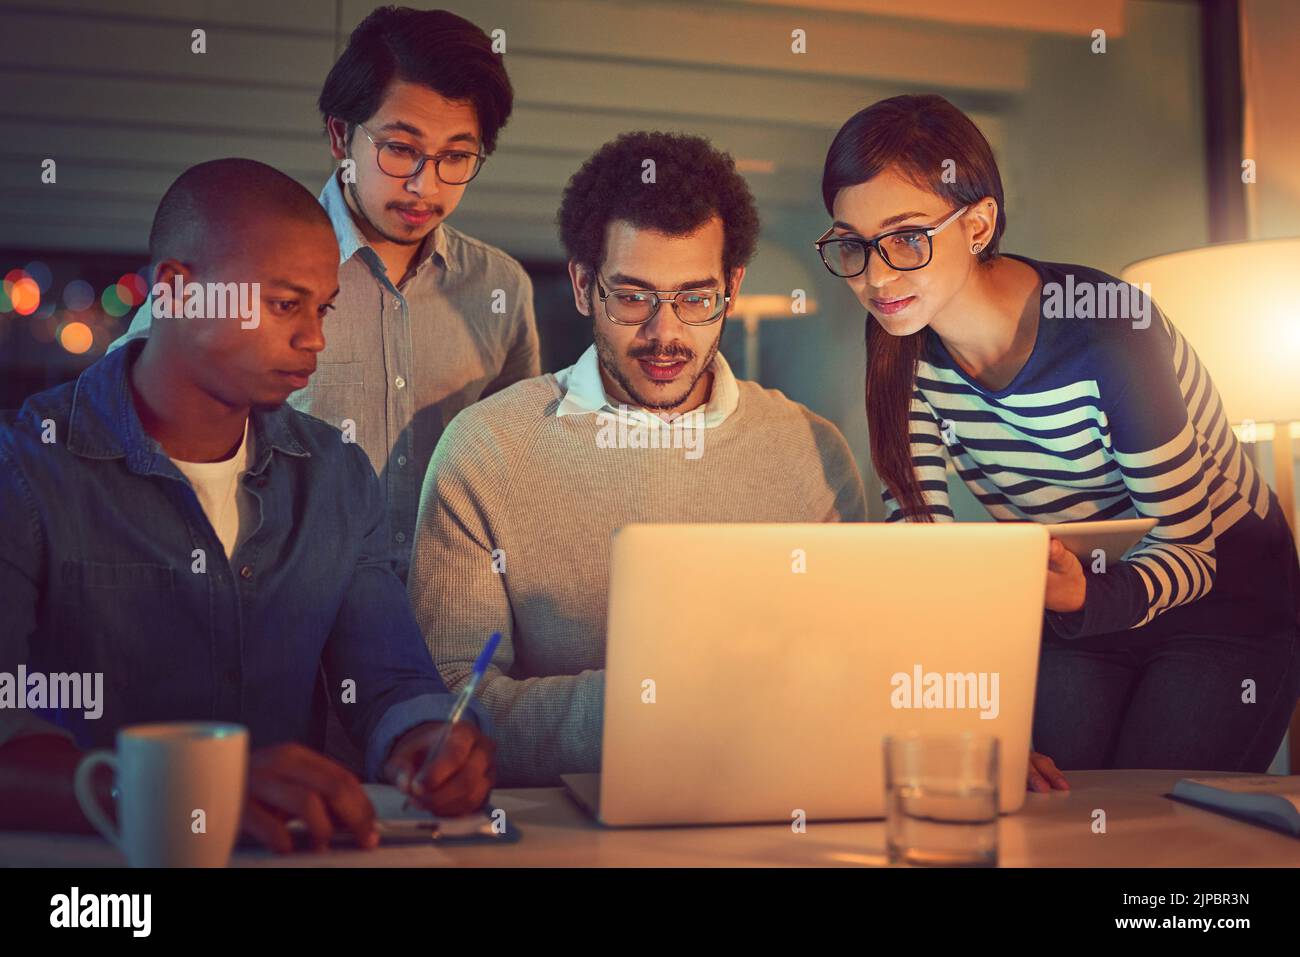 Putting their heads together to complete the project. a group of designers working late in an office. Stock Photo